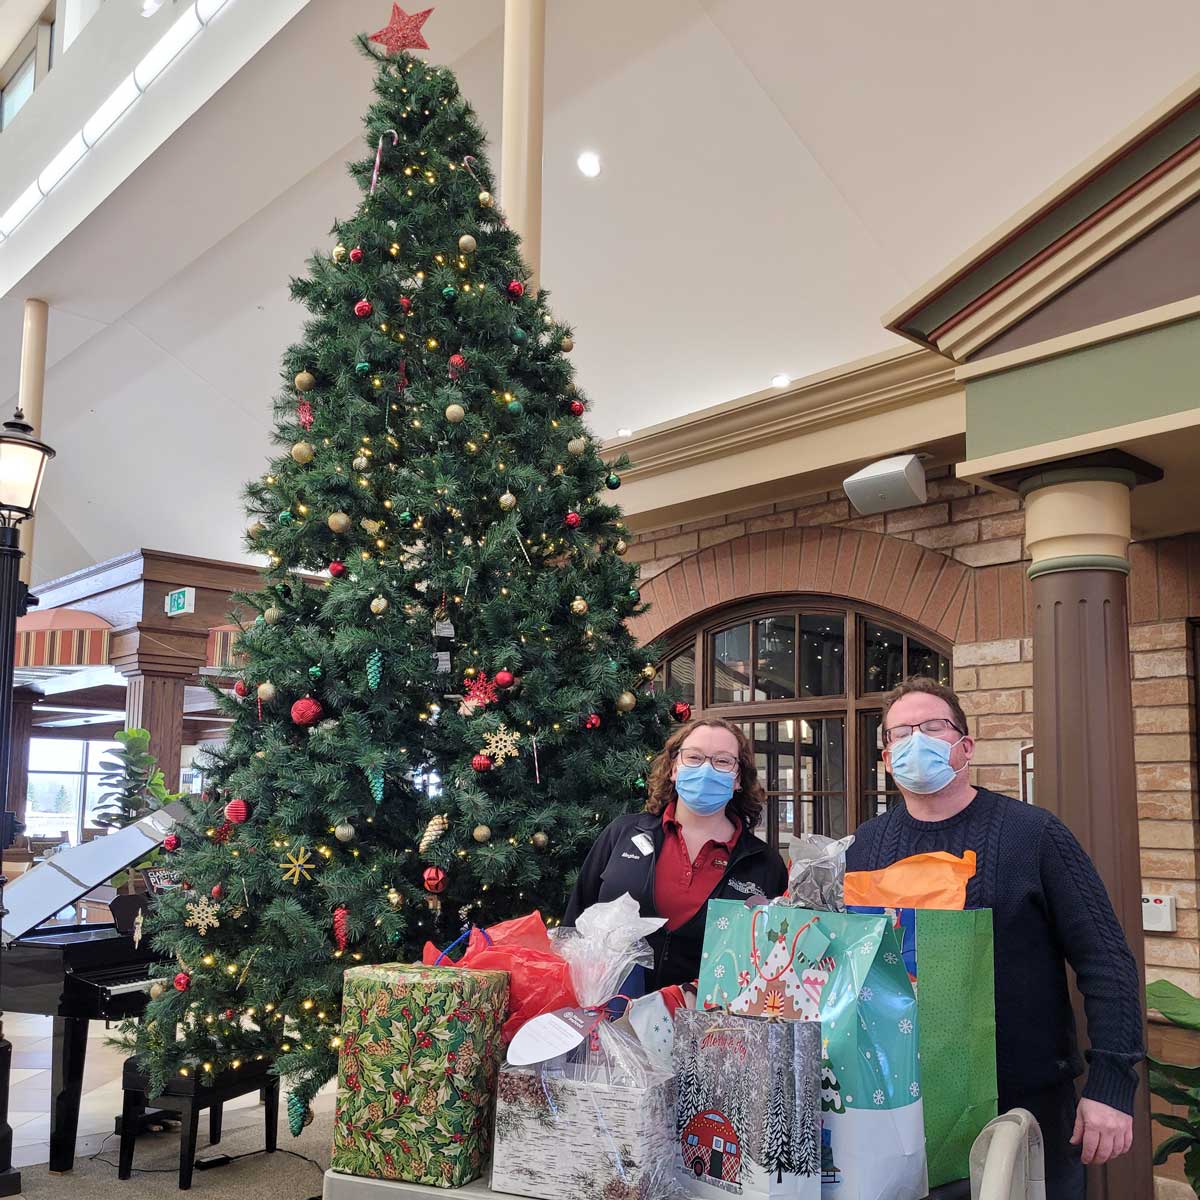 Drop off Gifts to Village of Winston Park - Kitchener